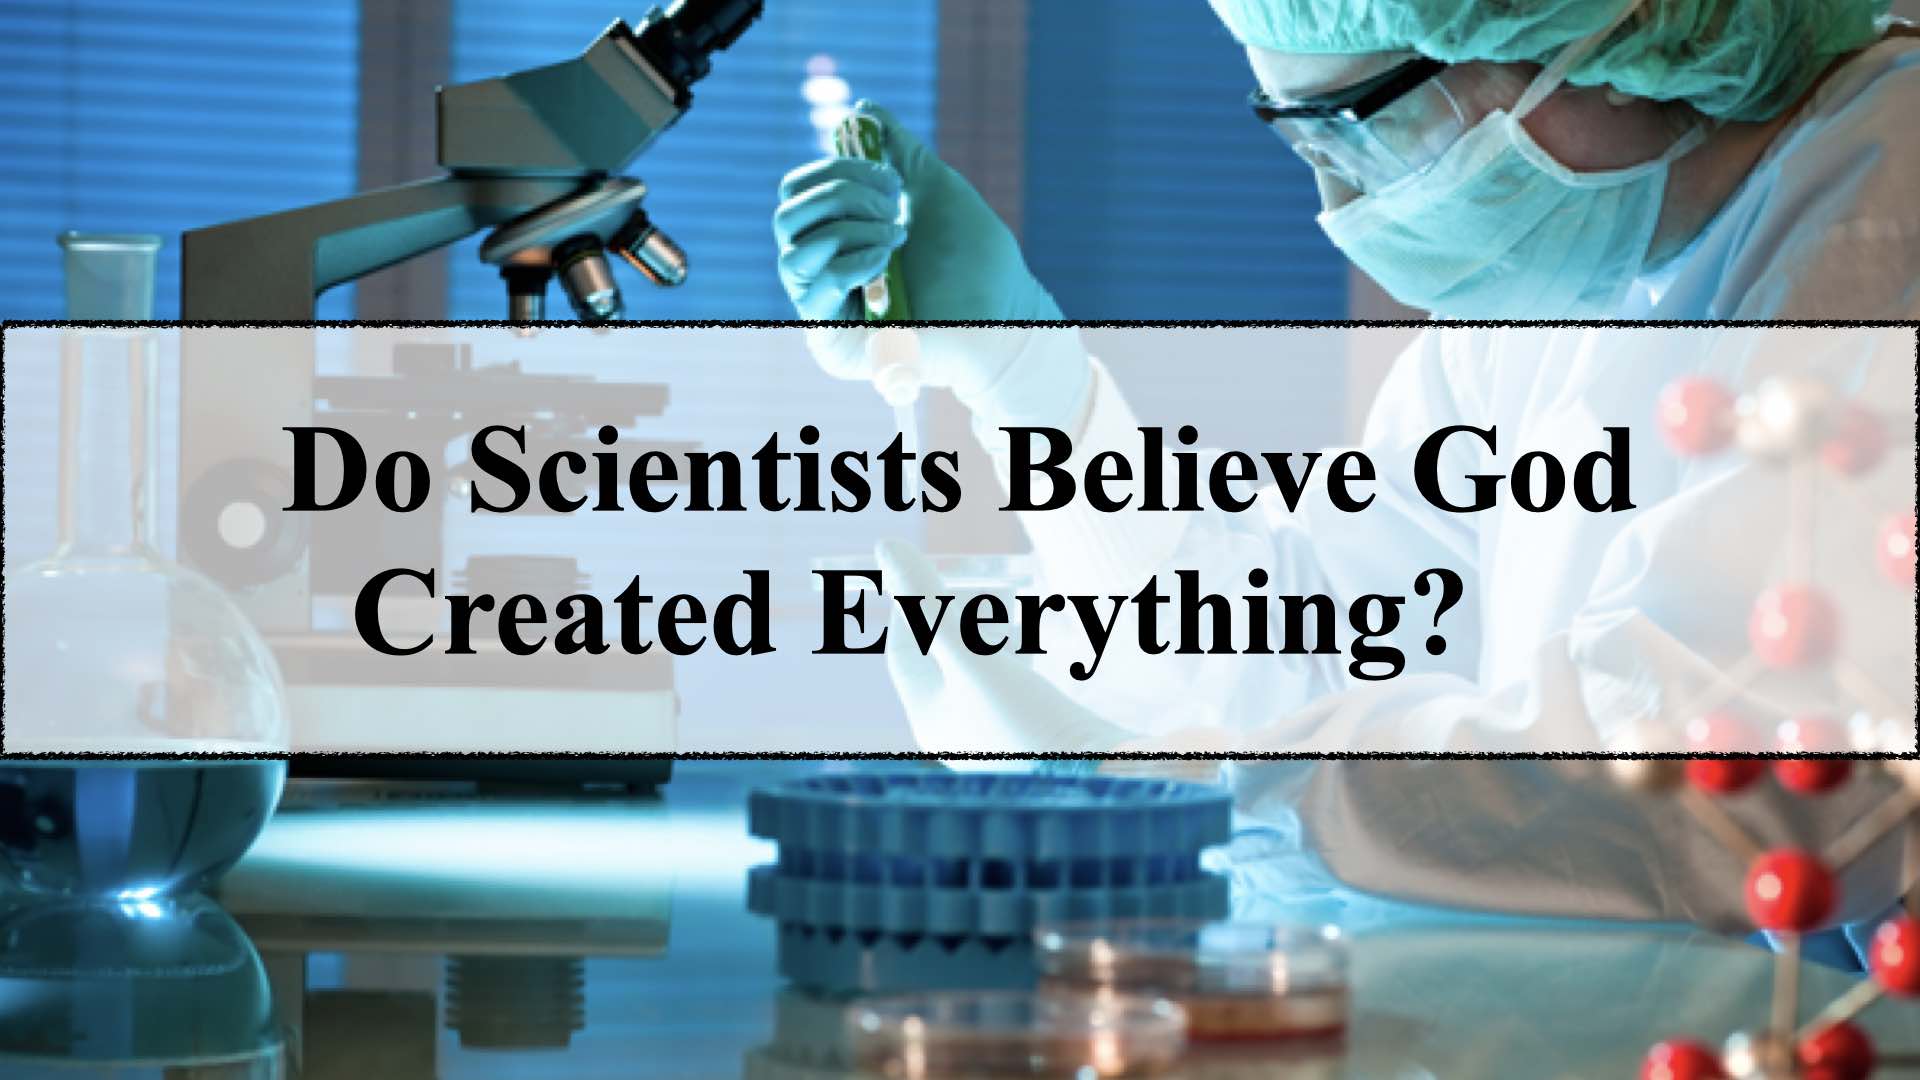 Do scientists believe God created everything?